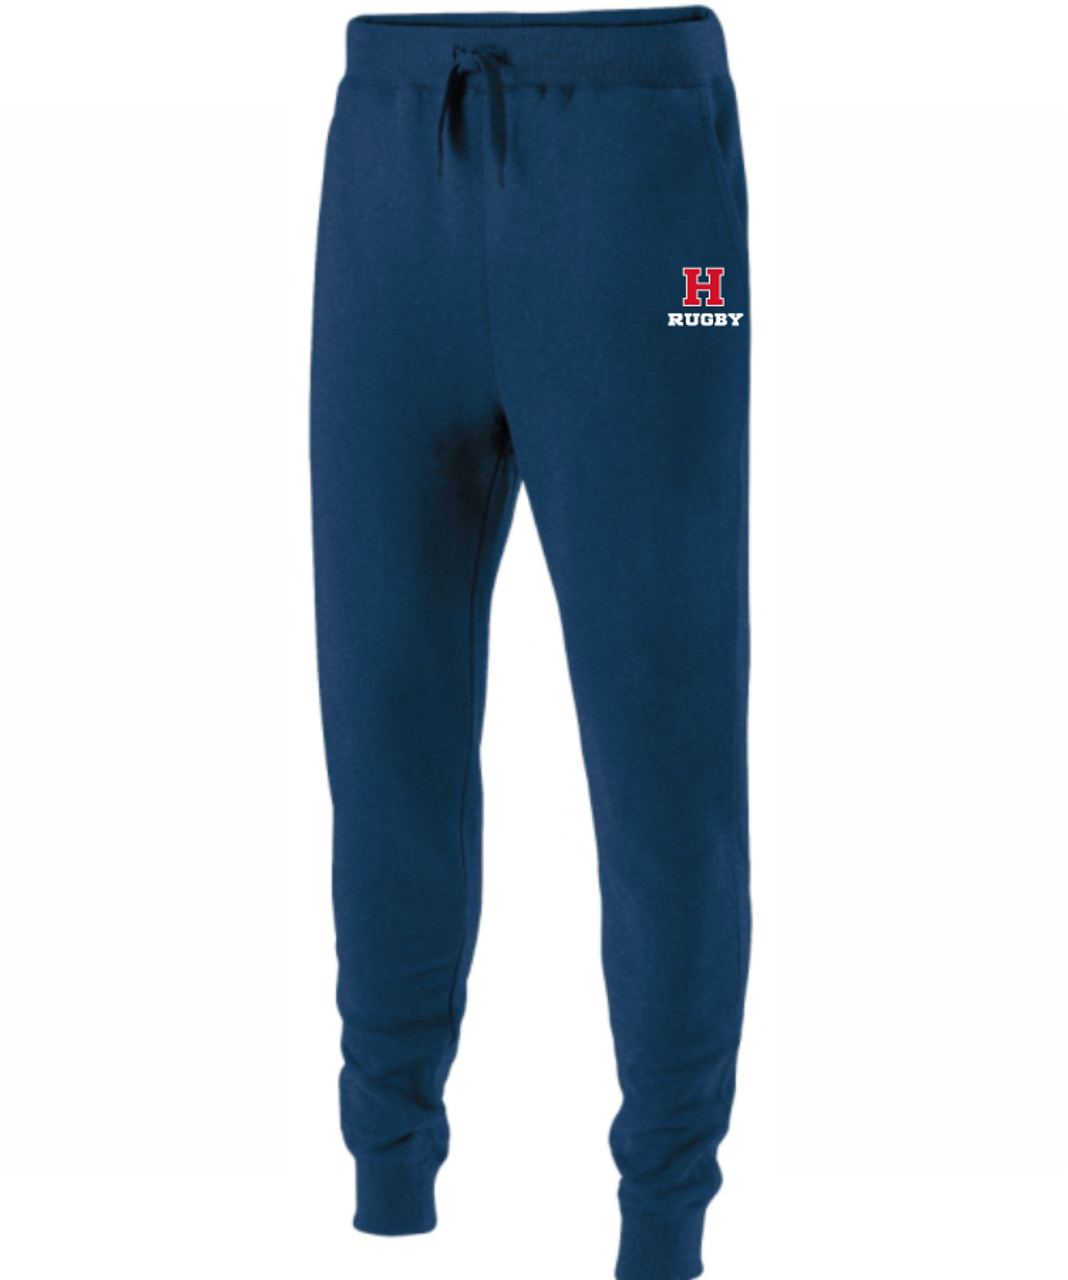 Howard University Rugby Jogger Pants | Steamroller Rugby Supply